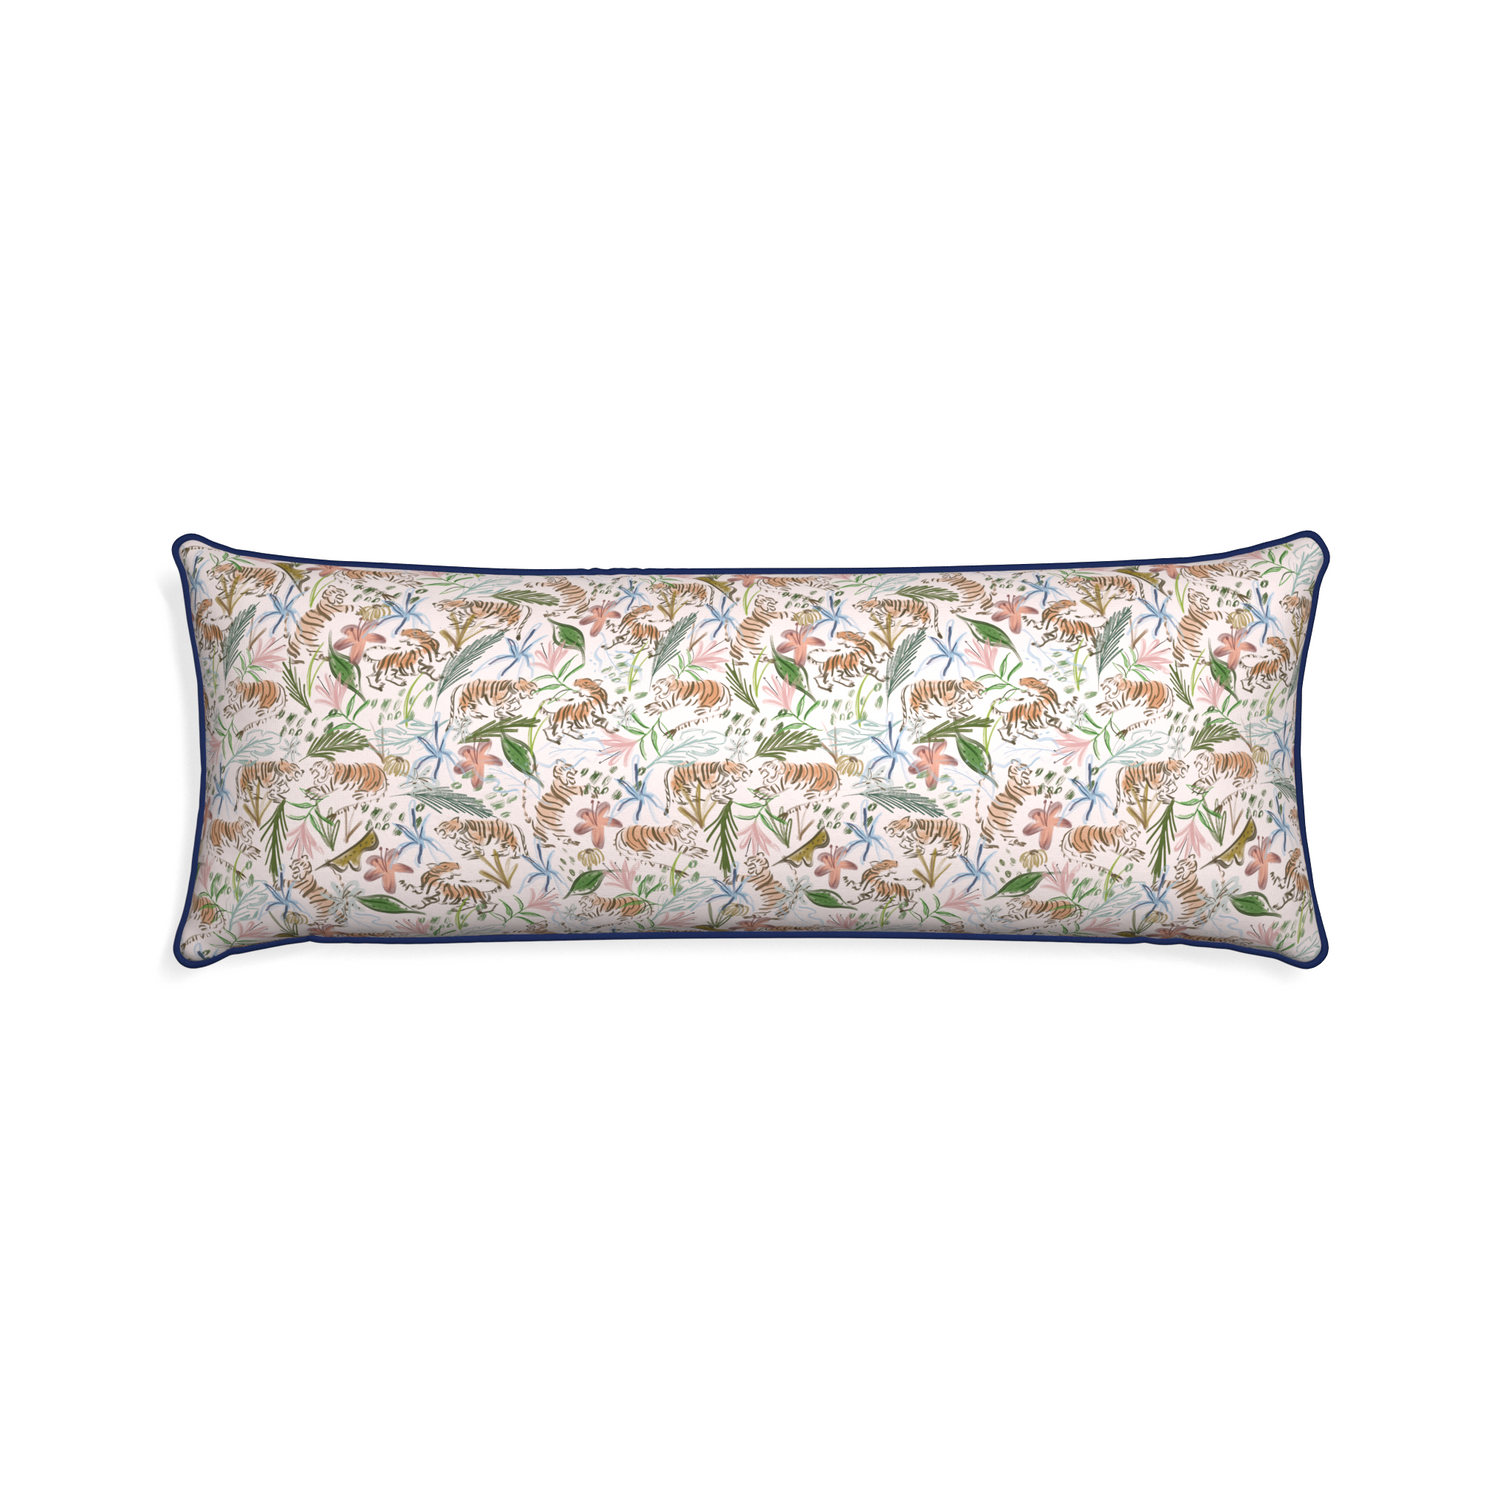 Xl-lumbar frida pink custom pink chinoiserie tigerpillow with midnight piping on white background